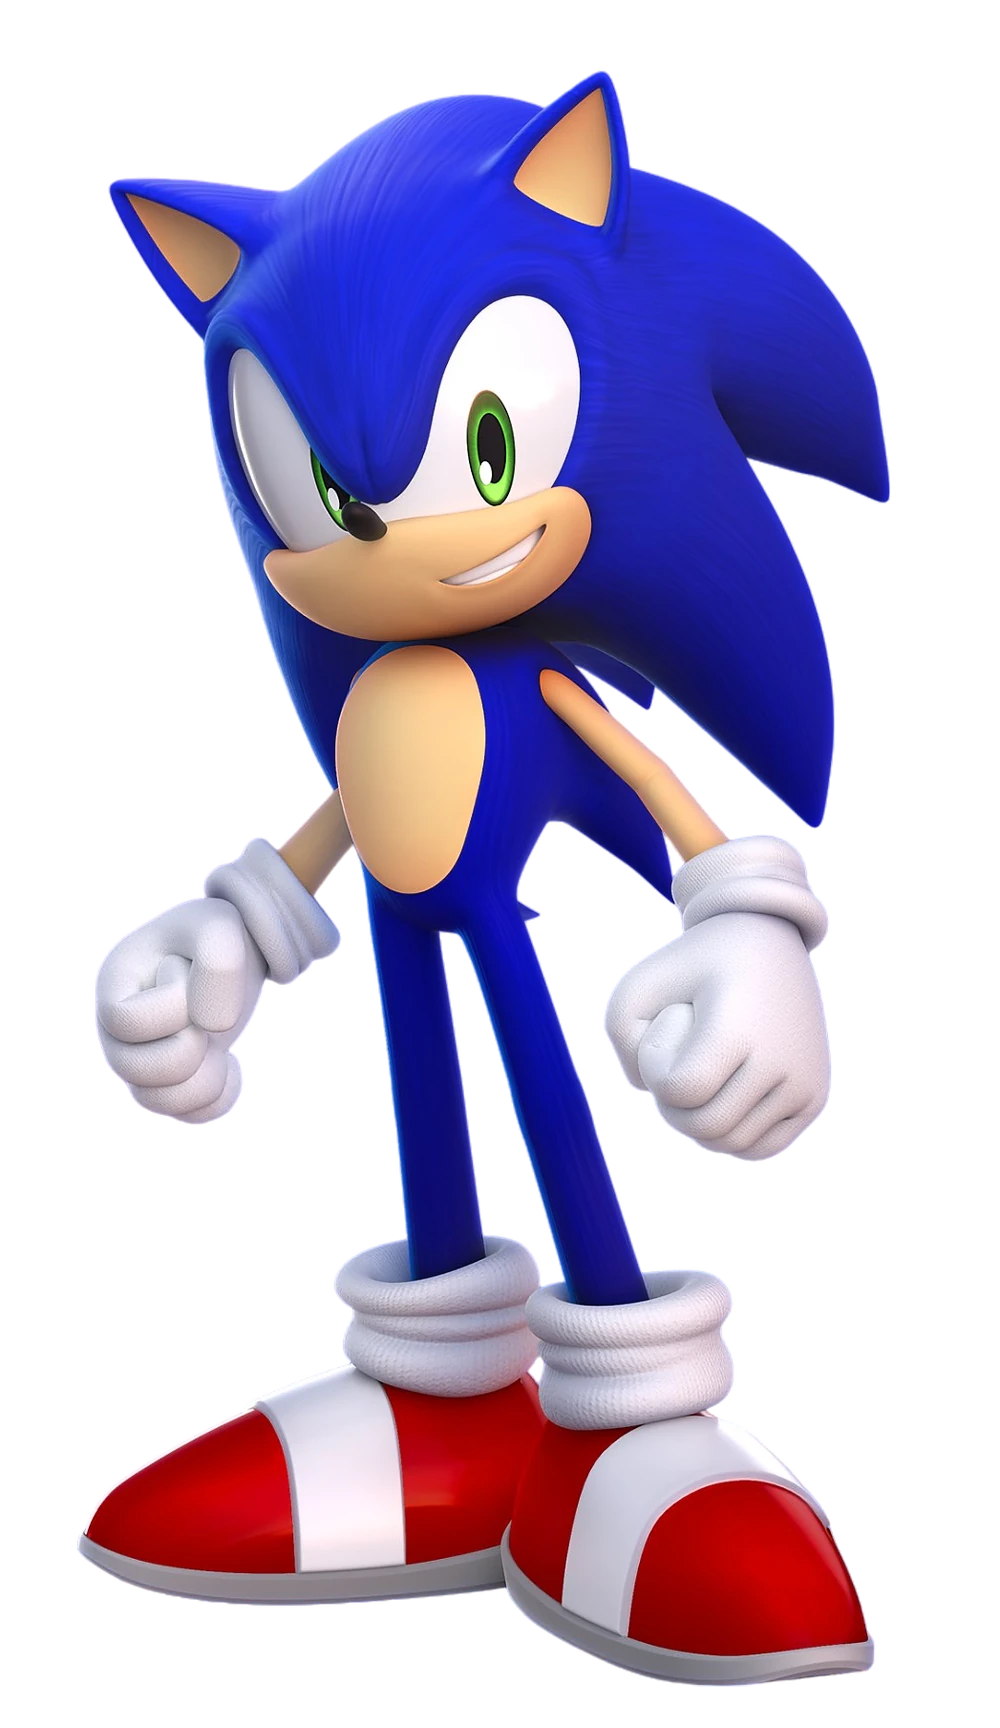 Sonic the Hedgehog Level Pack (Lego Dimensions), Sonic Wiki Zone